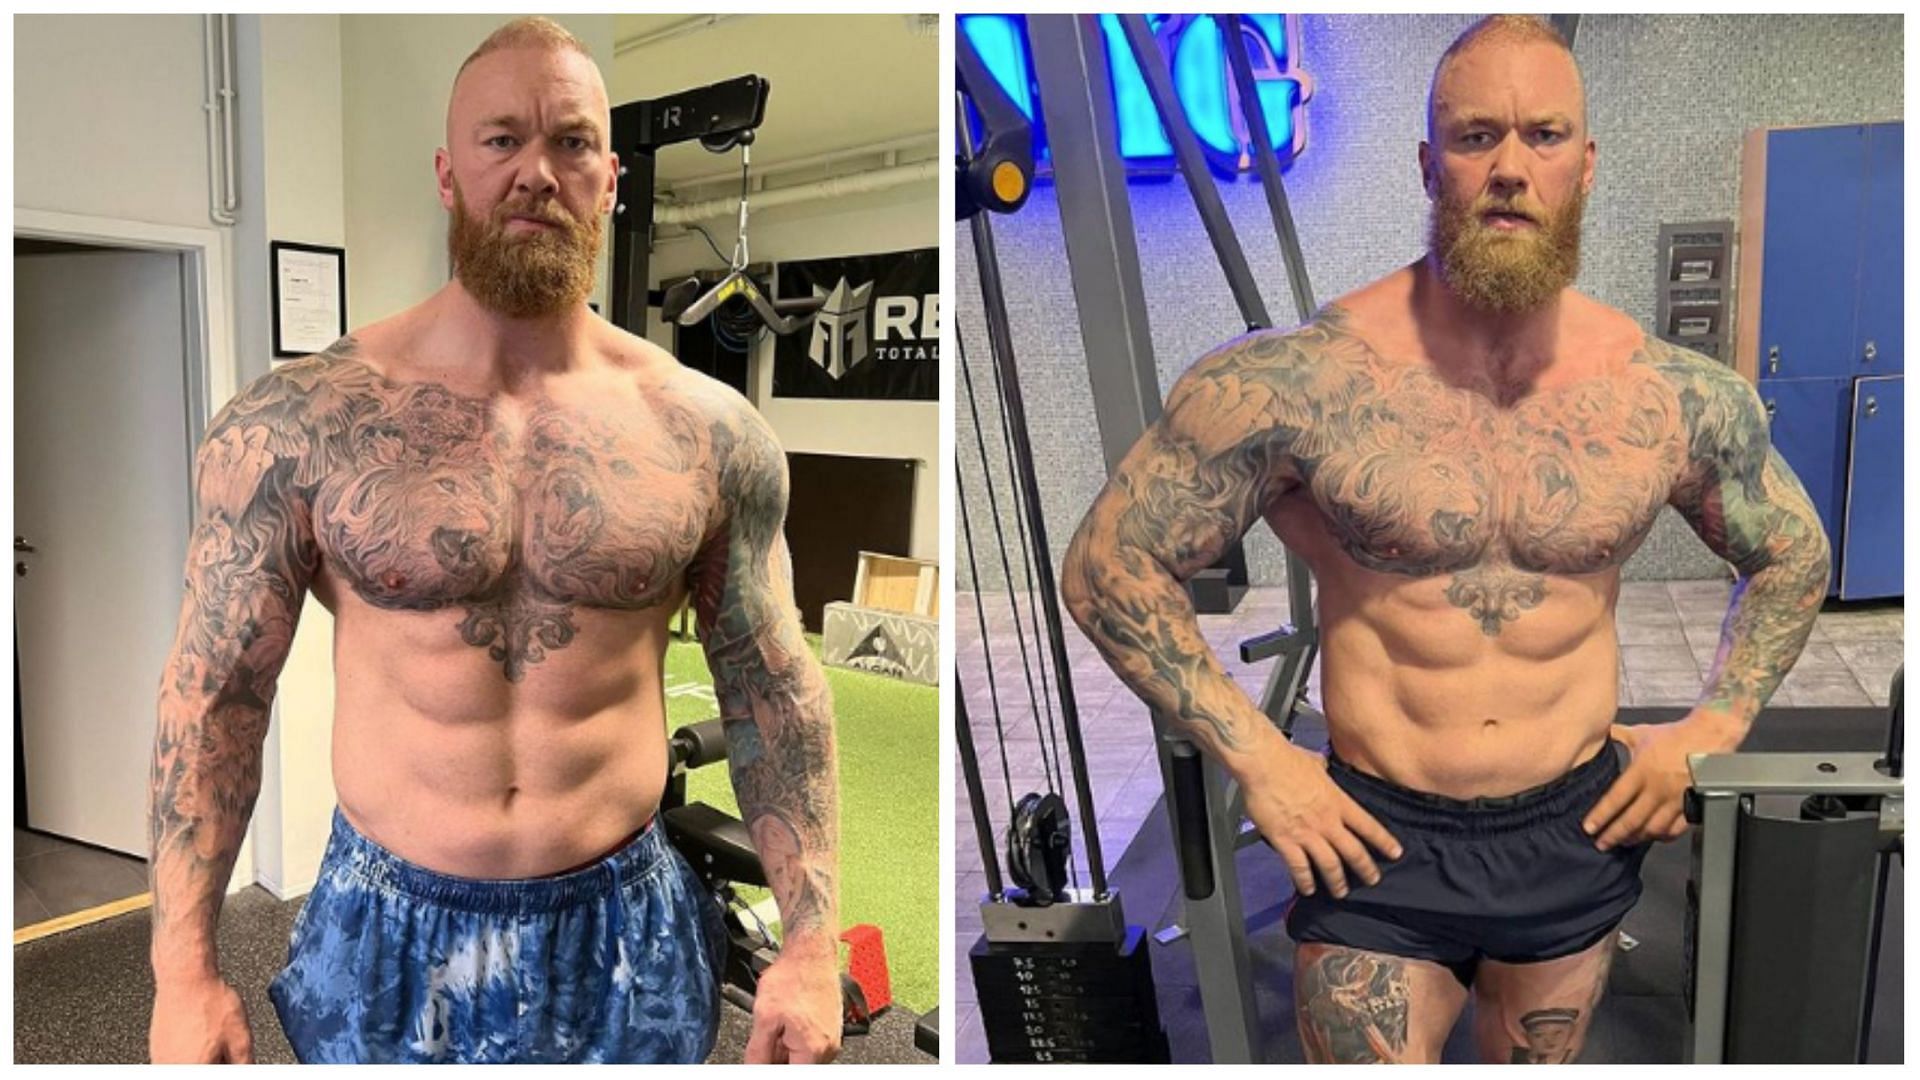 Hafthor Bjornsson is one of the most prominent strongman competitors in the world. (Image via Instagram @thorbjornsson)